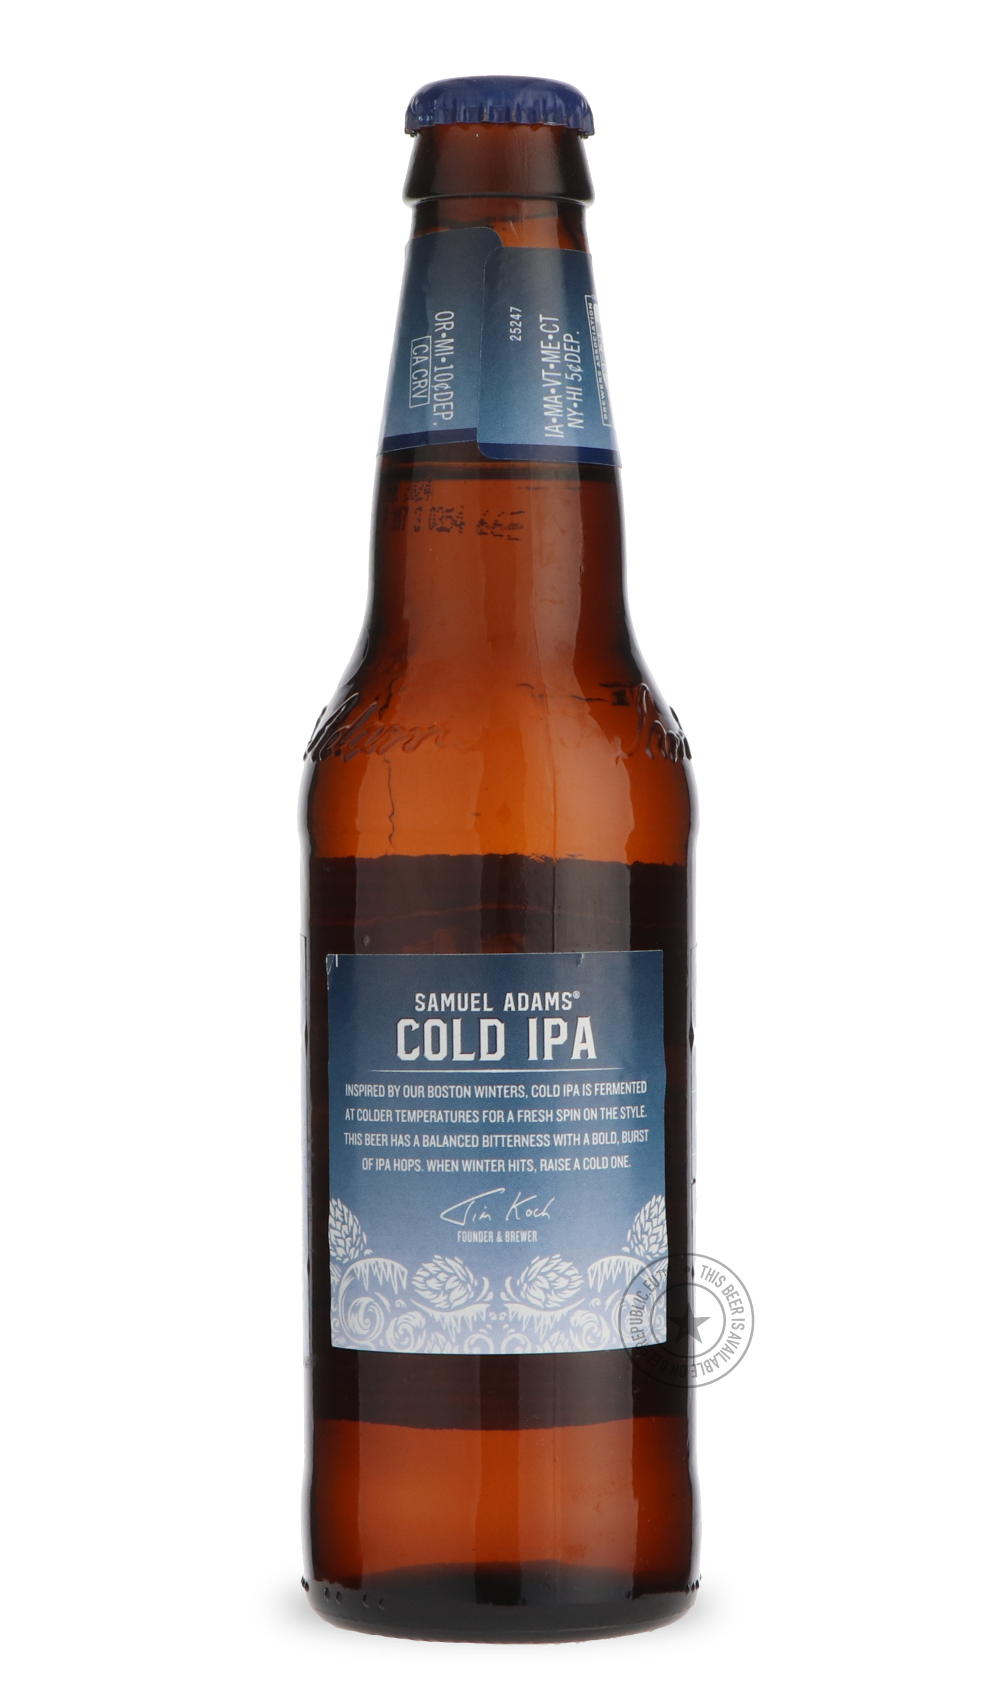 -Samuel Adams- Cold IPA-IPA- Only @ Beer Republic - The best online beer store for American & Canadian craft beer - Buy beer online from the USA and Canada - Bier online kopen - Amerikaans bier kopen - Craft beer store - Craft beer kopen - Amerikanisch bier kaufen - Bier online kaufen - Acheter biere online - IPA - Stout - Porter - New England IPA - Hazy IPA - Imperial Stout - Barrel Aged - Barrel Aged Imperial Stout - Brown - Dark beer - Blond - Blonde - Pilsner - Lager - Wheat - Weizen - Amber - Barley Wi